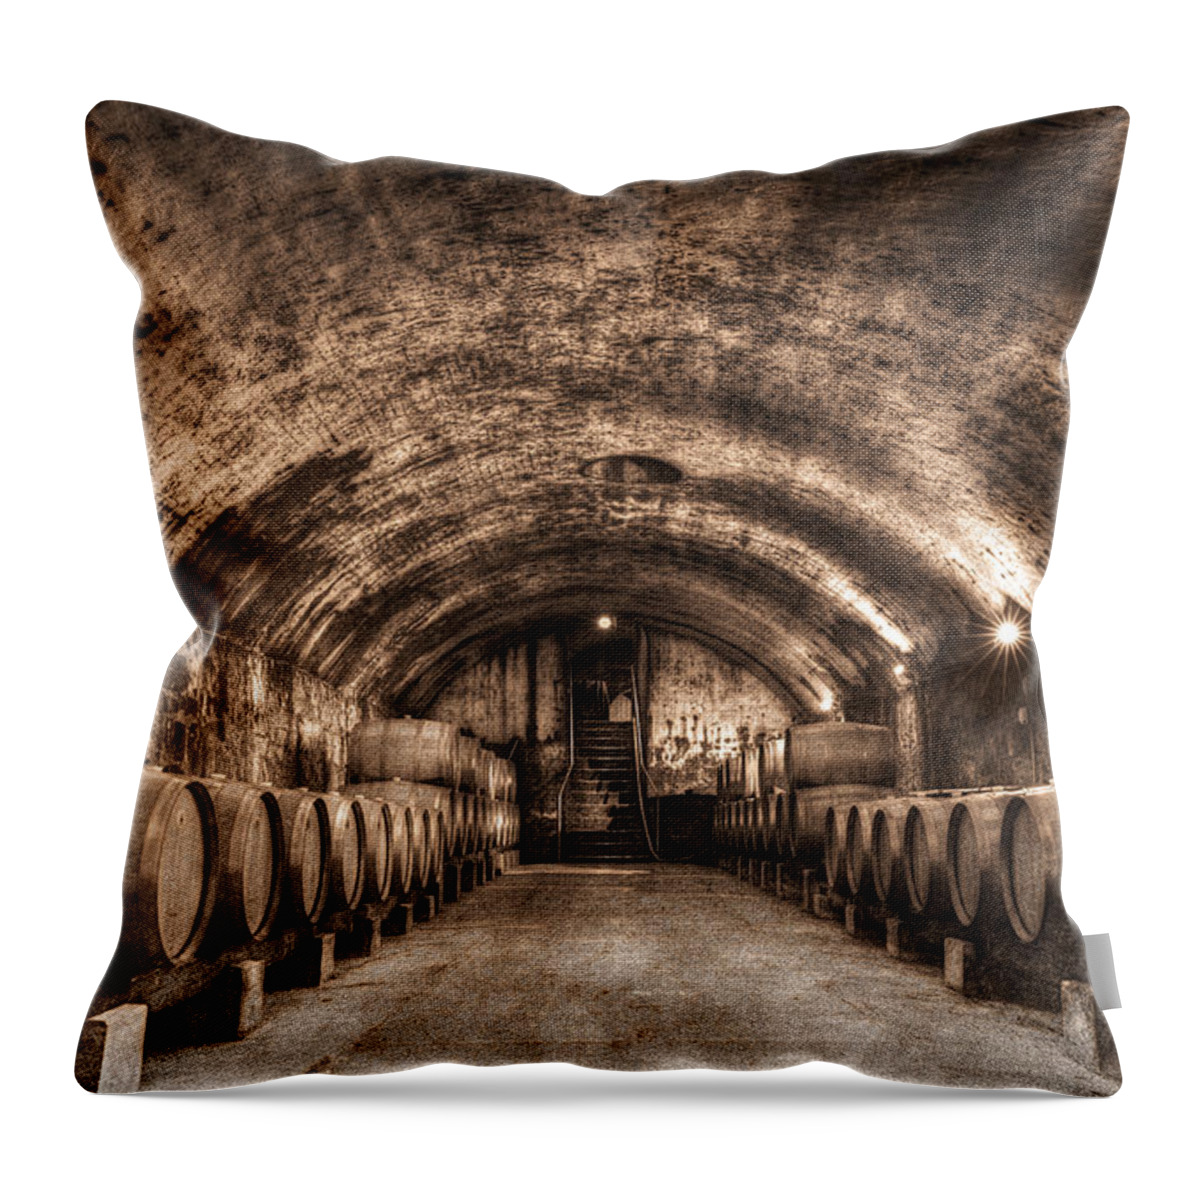 Ancient Aging Throw Pillow featuring the photograph Ancient Aging by William Fields